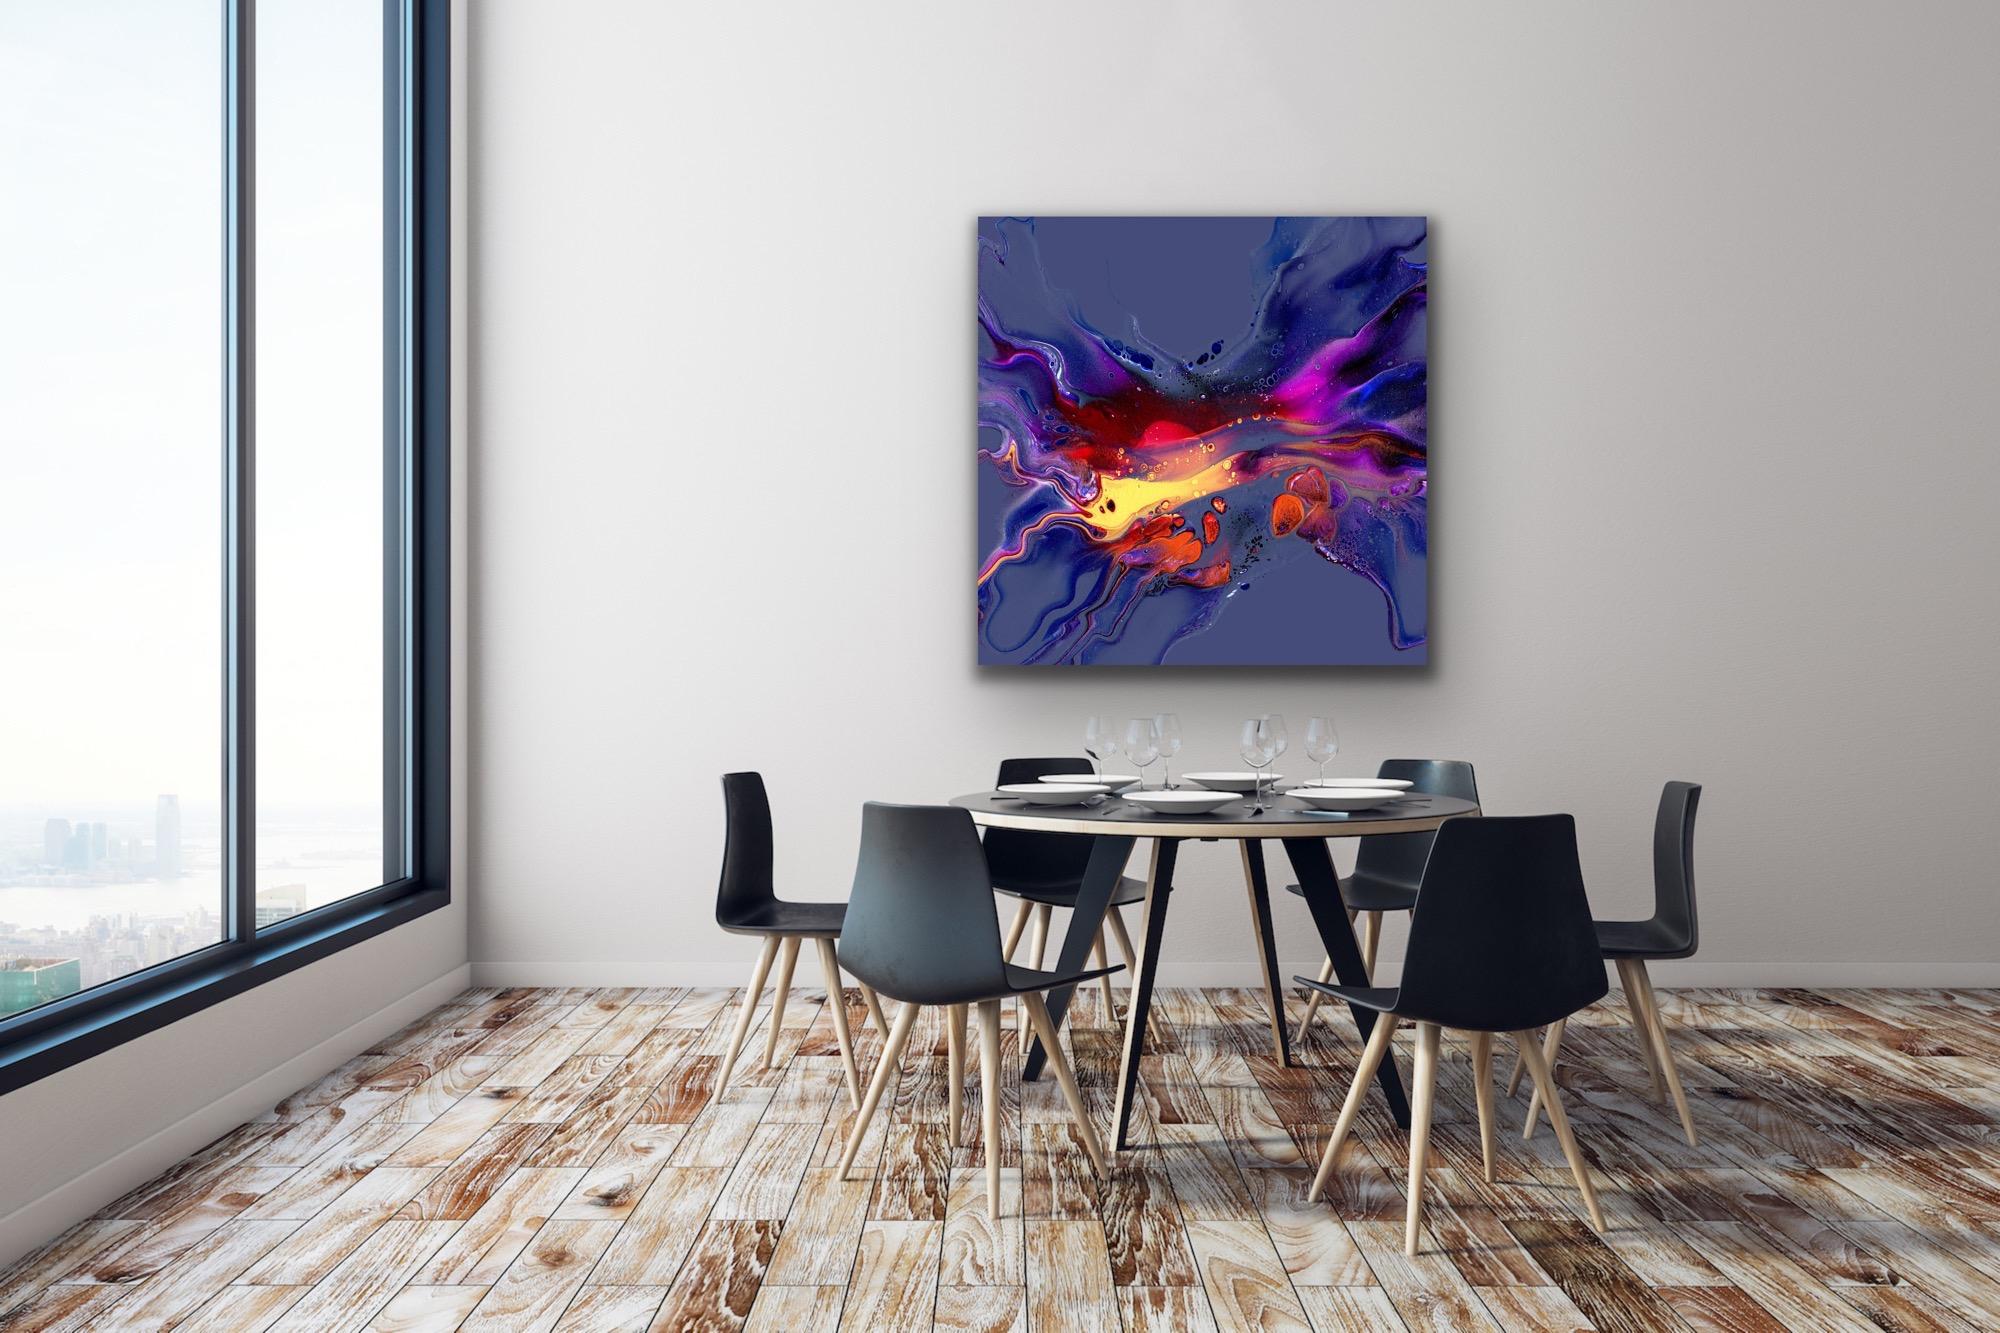 This contemporary modern abstract painting is printed on a lightweight metal composite and comes ready to hang. This vibrant composition can be hung both indoor and outdoor as it is weather resistant.

-Title: Cozen
-Artist: Celeste Reiter
-Open